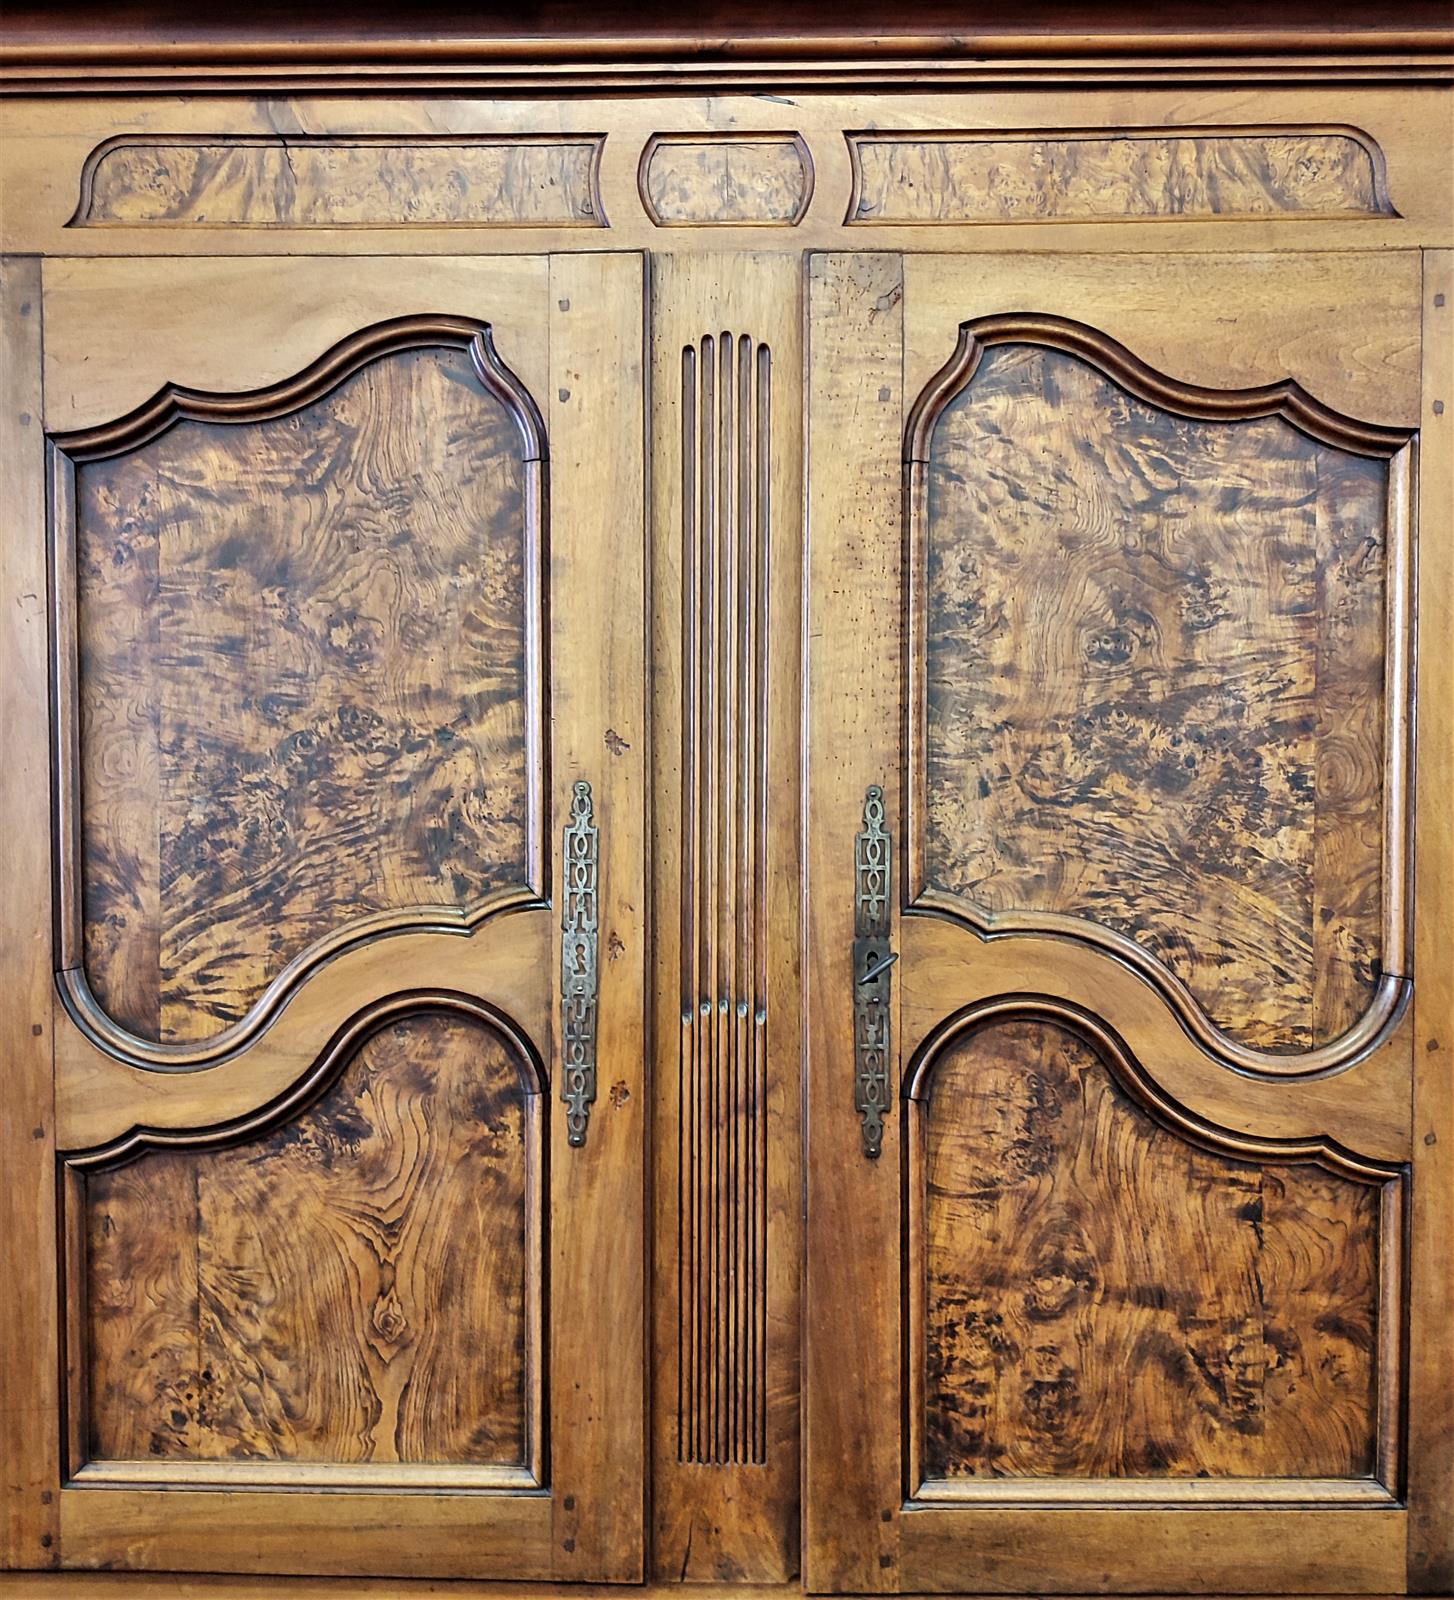 Provençal sideboard two corps